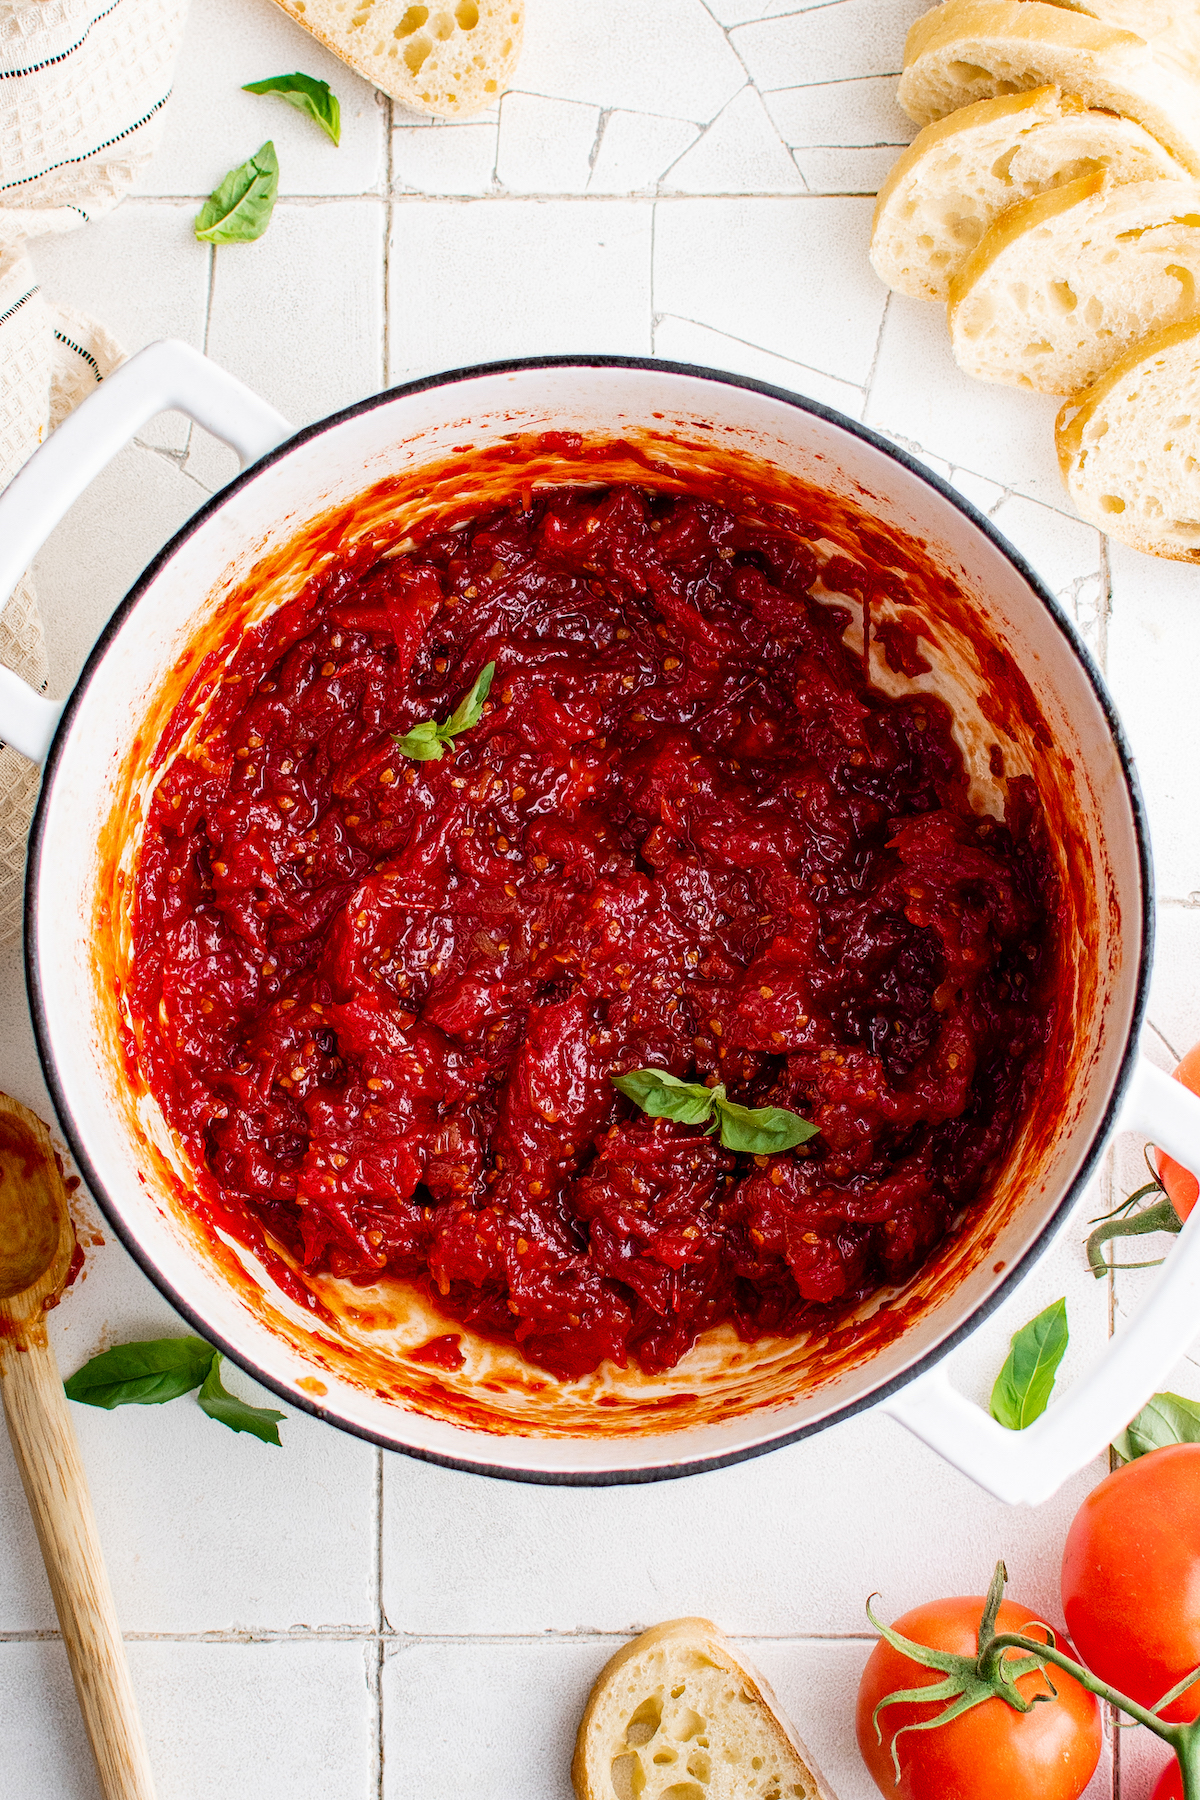 Slow-simmered tomato jam in a pot.